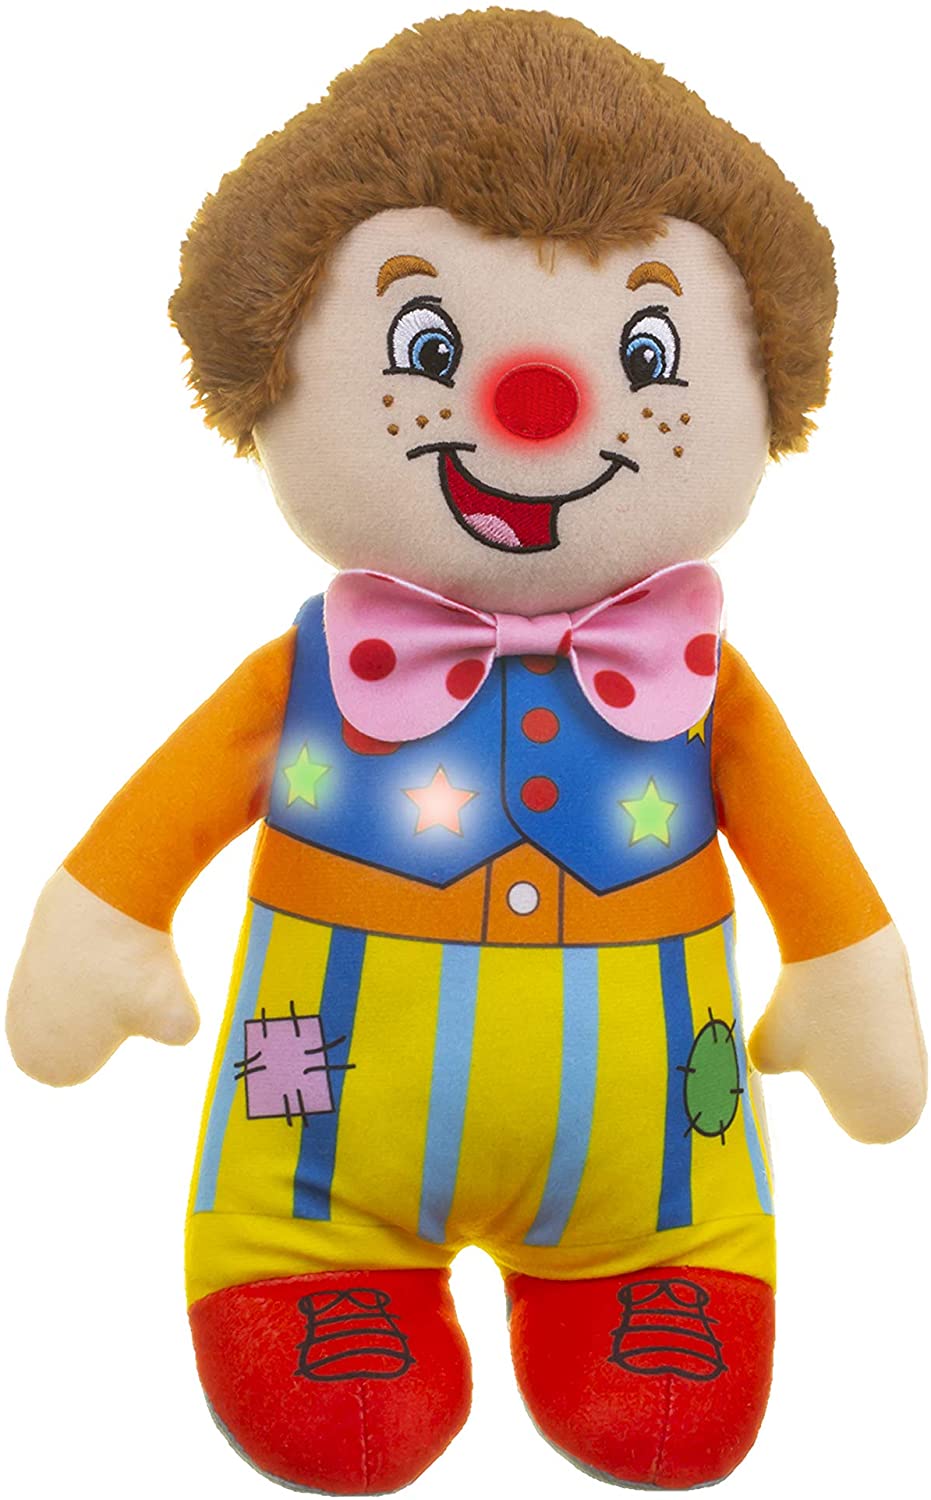 Touch My Nose Sensory Mr Tumble Knuffel, Cbeebies, Something Special, Light Up